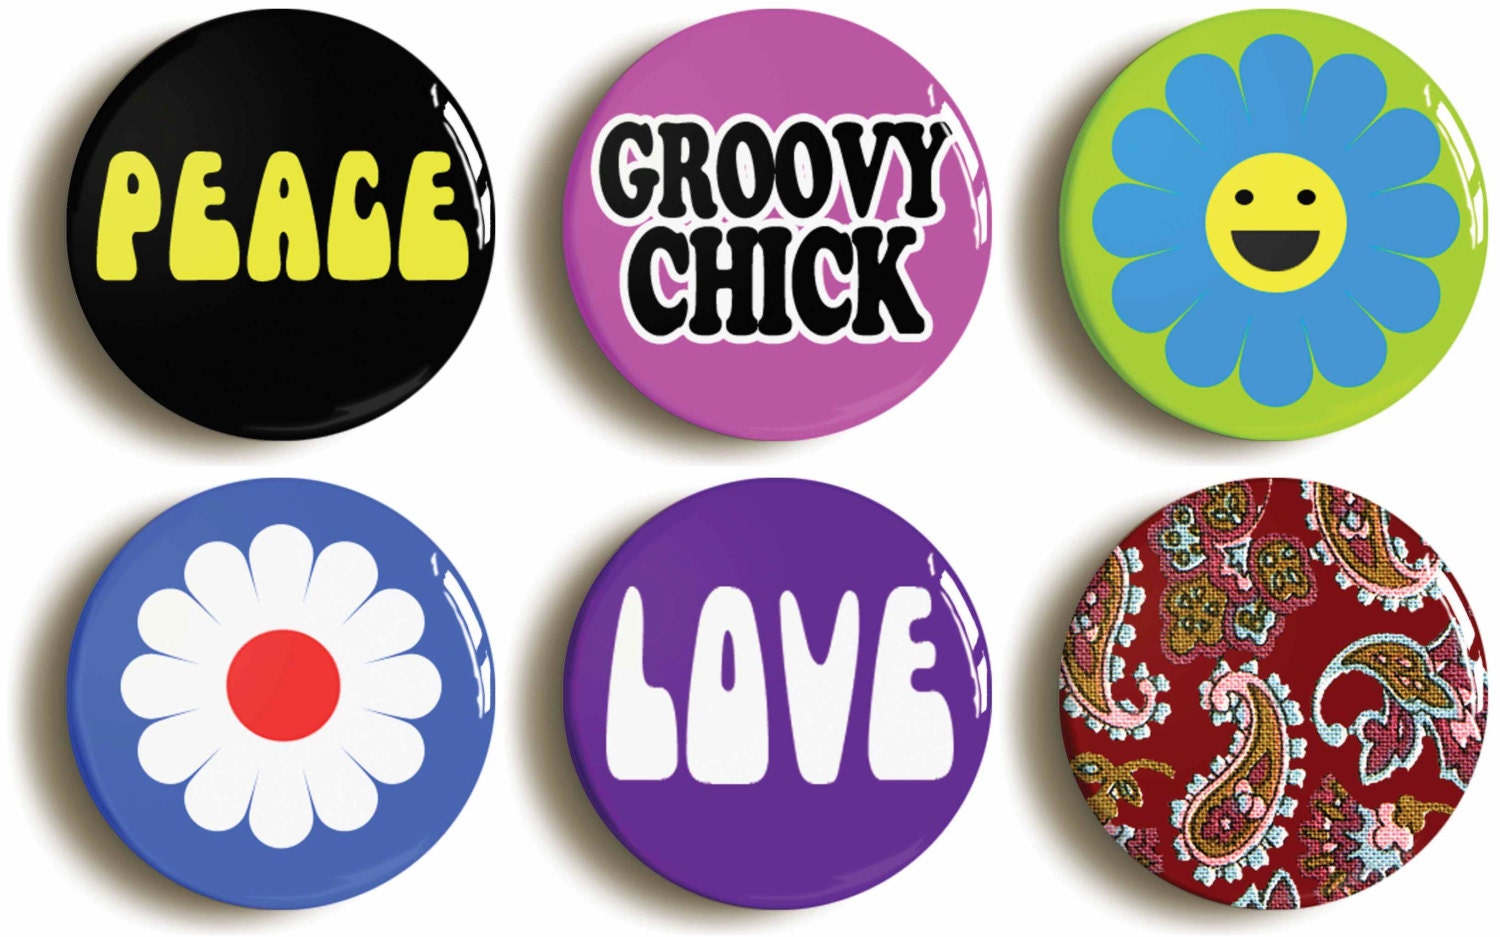 Sixties Hippie Chick Badges Buttons Pins Set Of Six Peace Groovy Chick Love Flower Paisley 2714